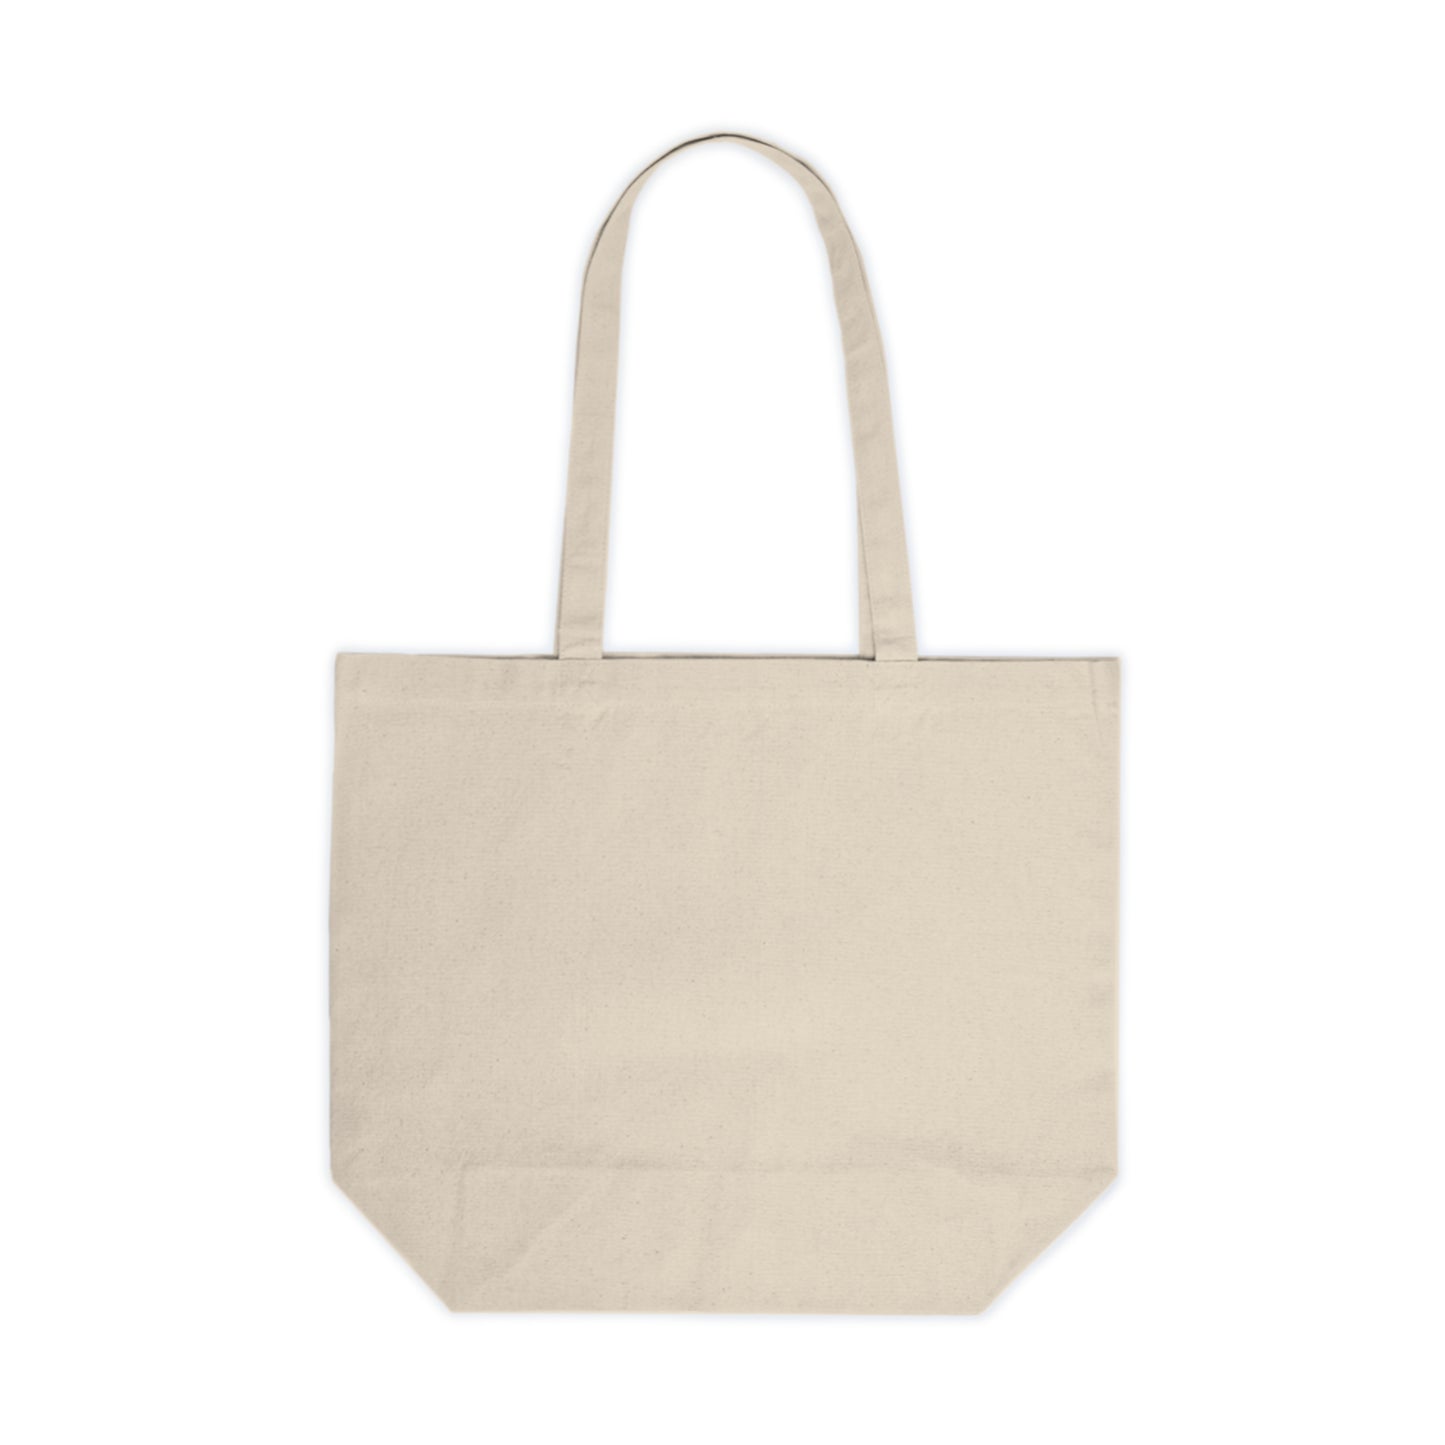 The back of the canvas tote with no graphic or print